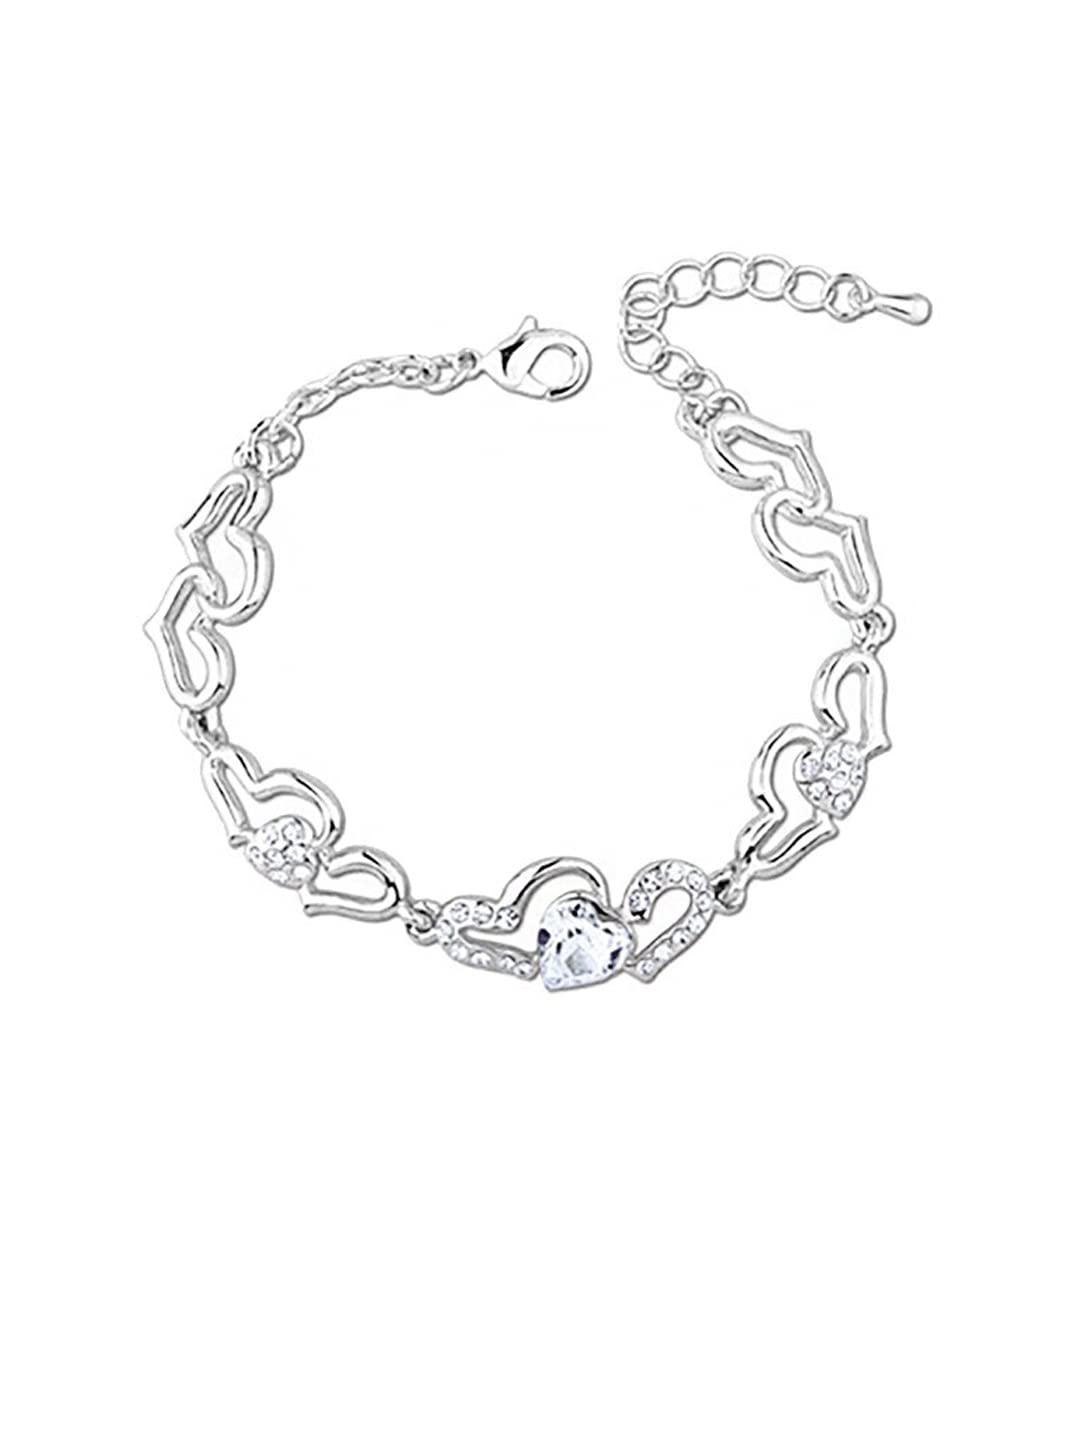 Silver Bracelet Hd Transparent, A Variety Of Sterling Silver Bracelets,  Full Of Charm, High End Atmosphere, Without Losing Elegance PNG Image For  Free Download